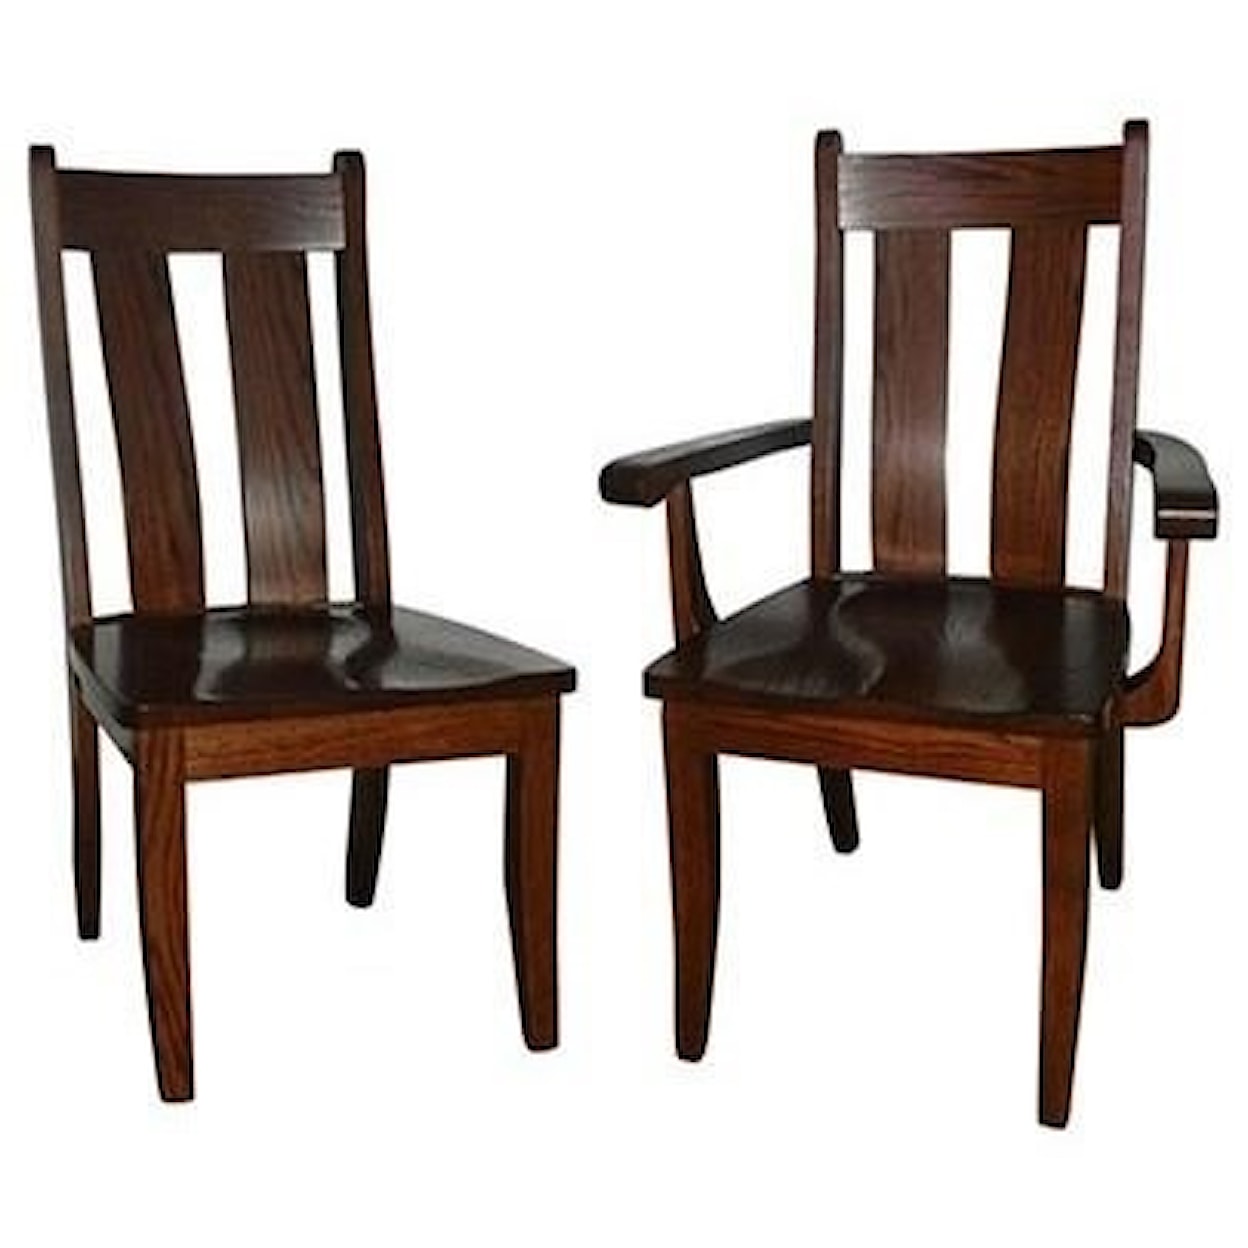 Horseshoe Bend Heritage Customizable Solid Wood Side Chair